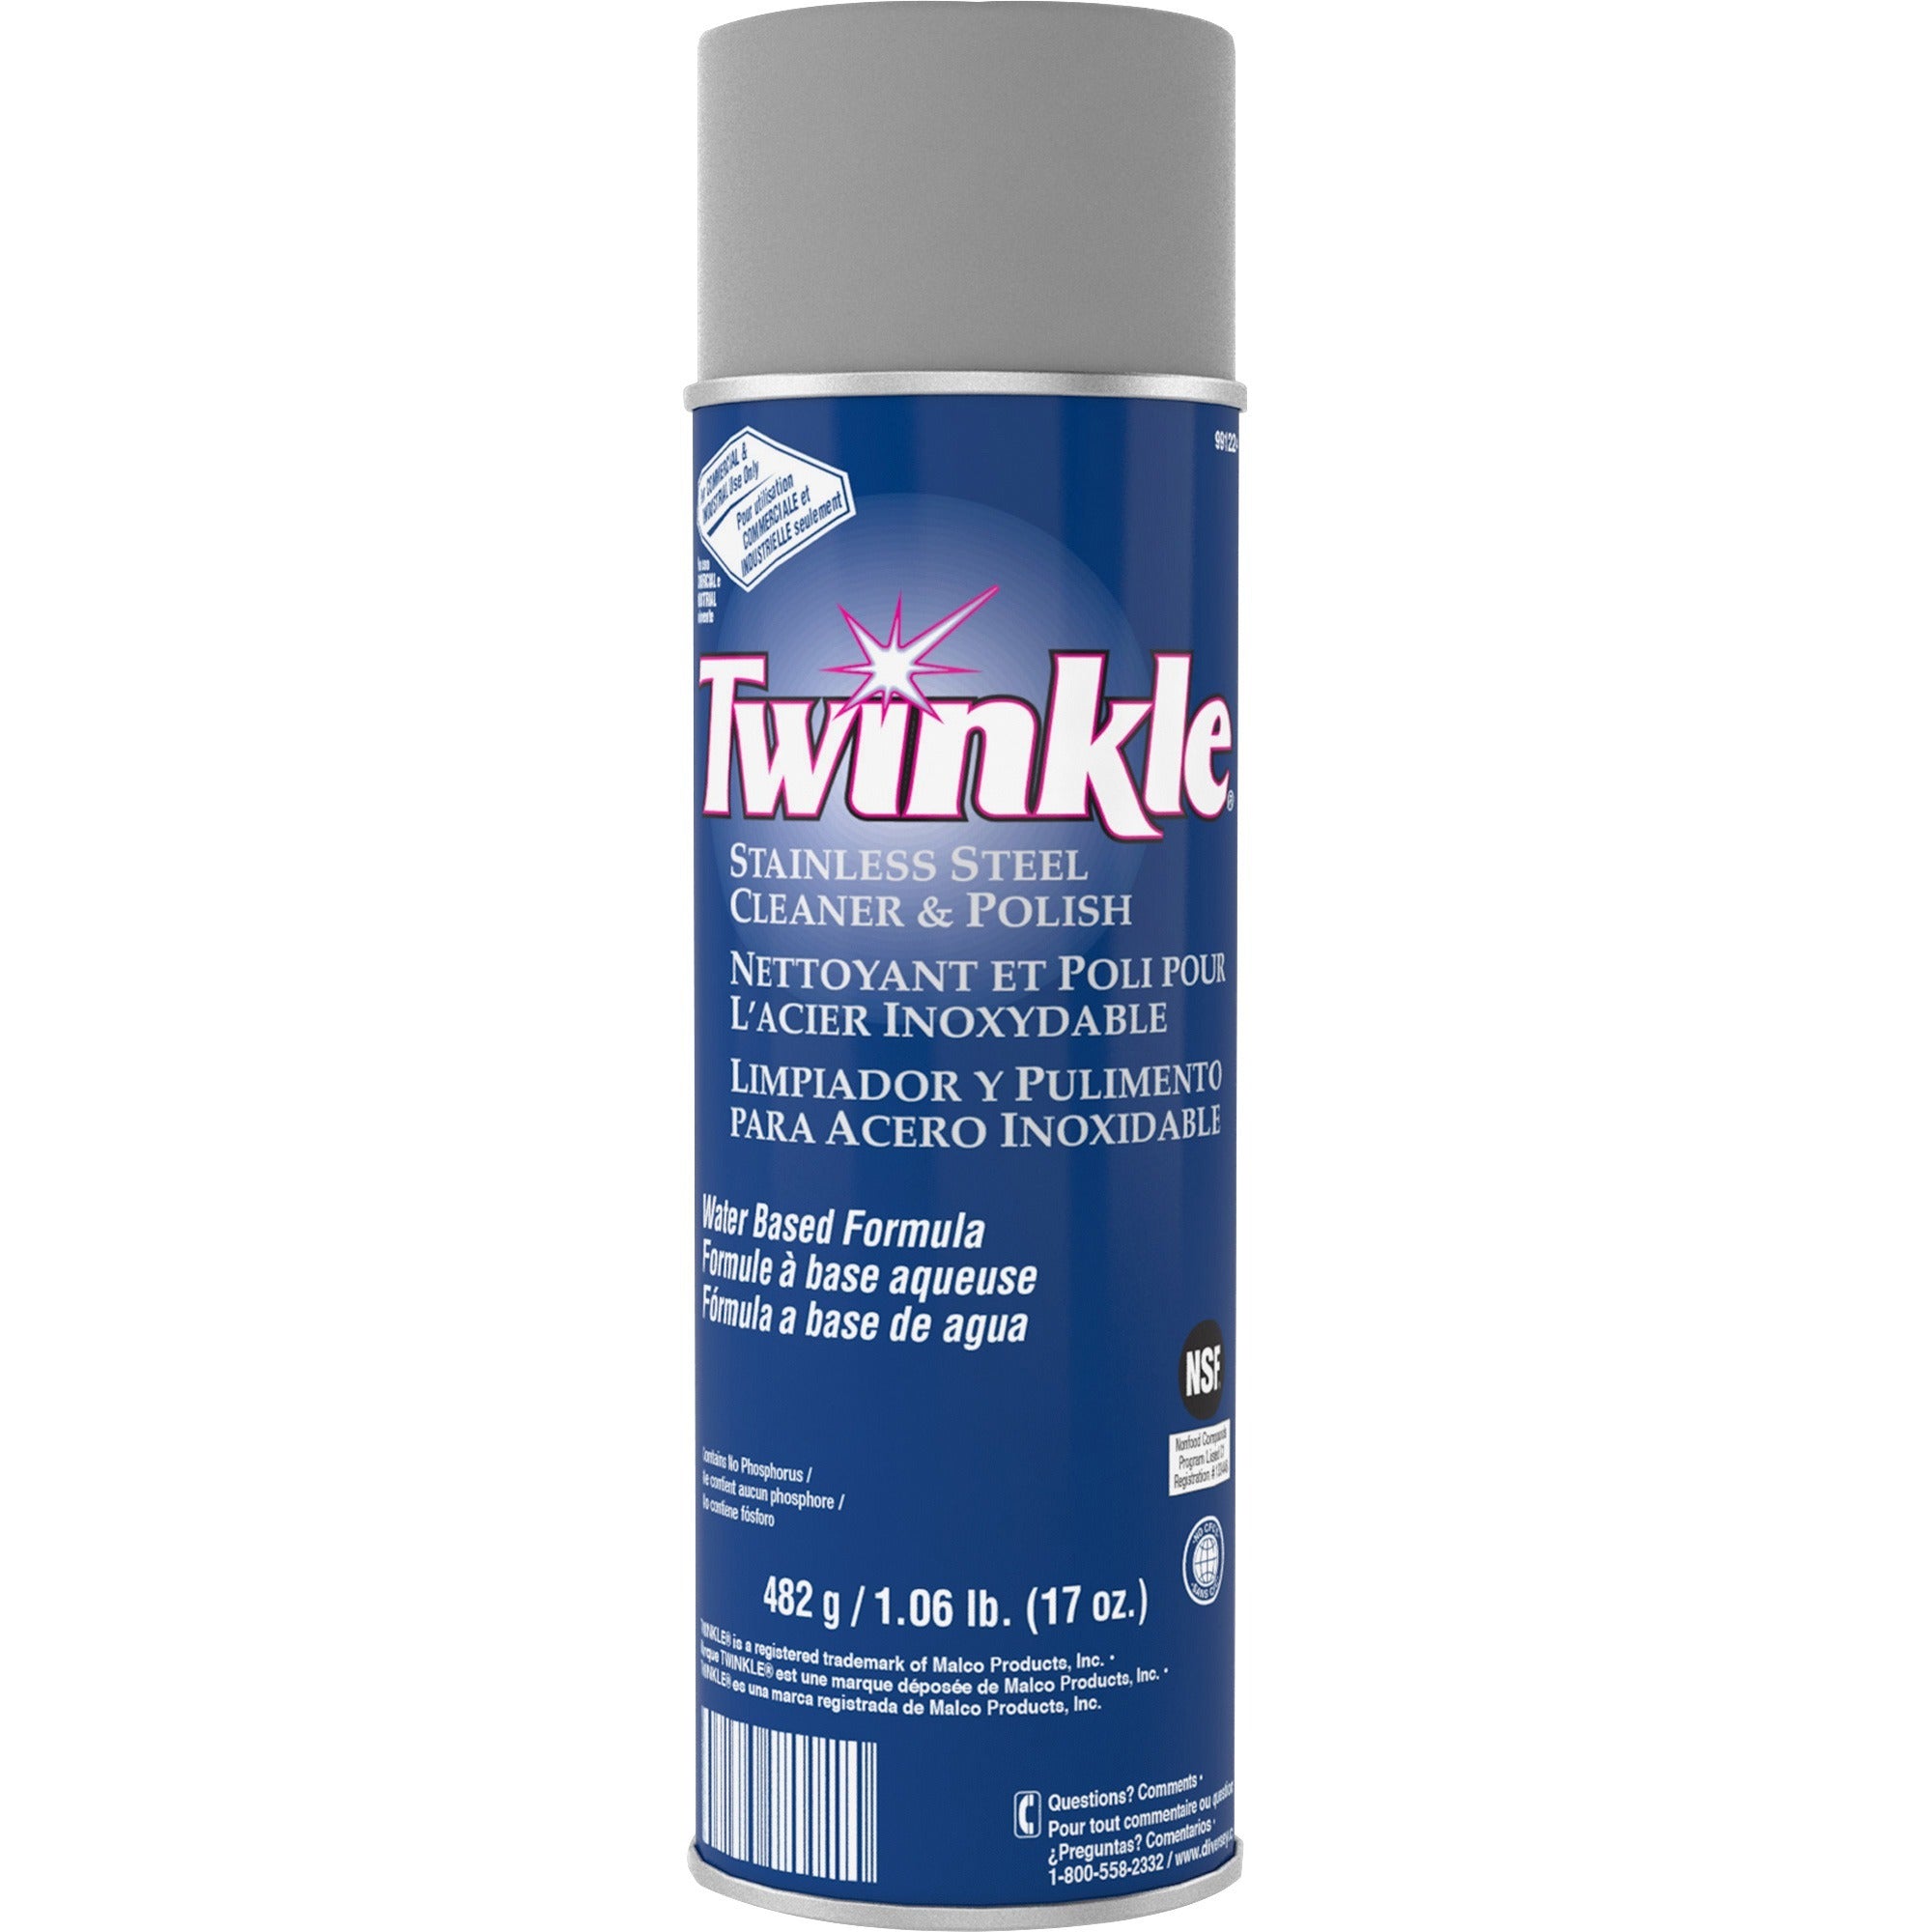 twinkle-stainless-steel-cleaner-polish-ready-to-use-17-oz-106-lb-characteristic-scent-12-carton-film-free-residue-free-water-based-lemon-scent-cfc-free-white_dvo991224ct - 2